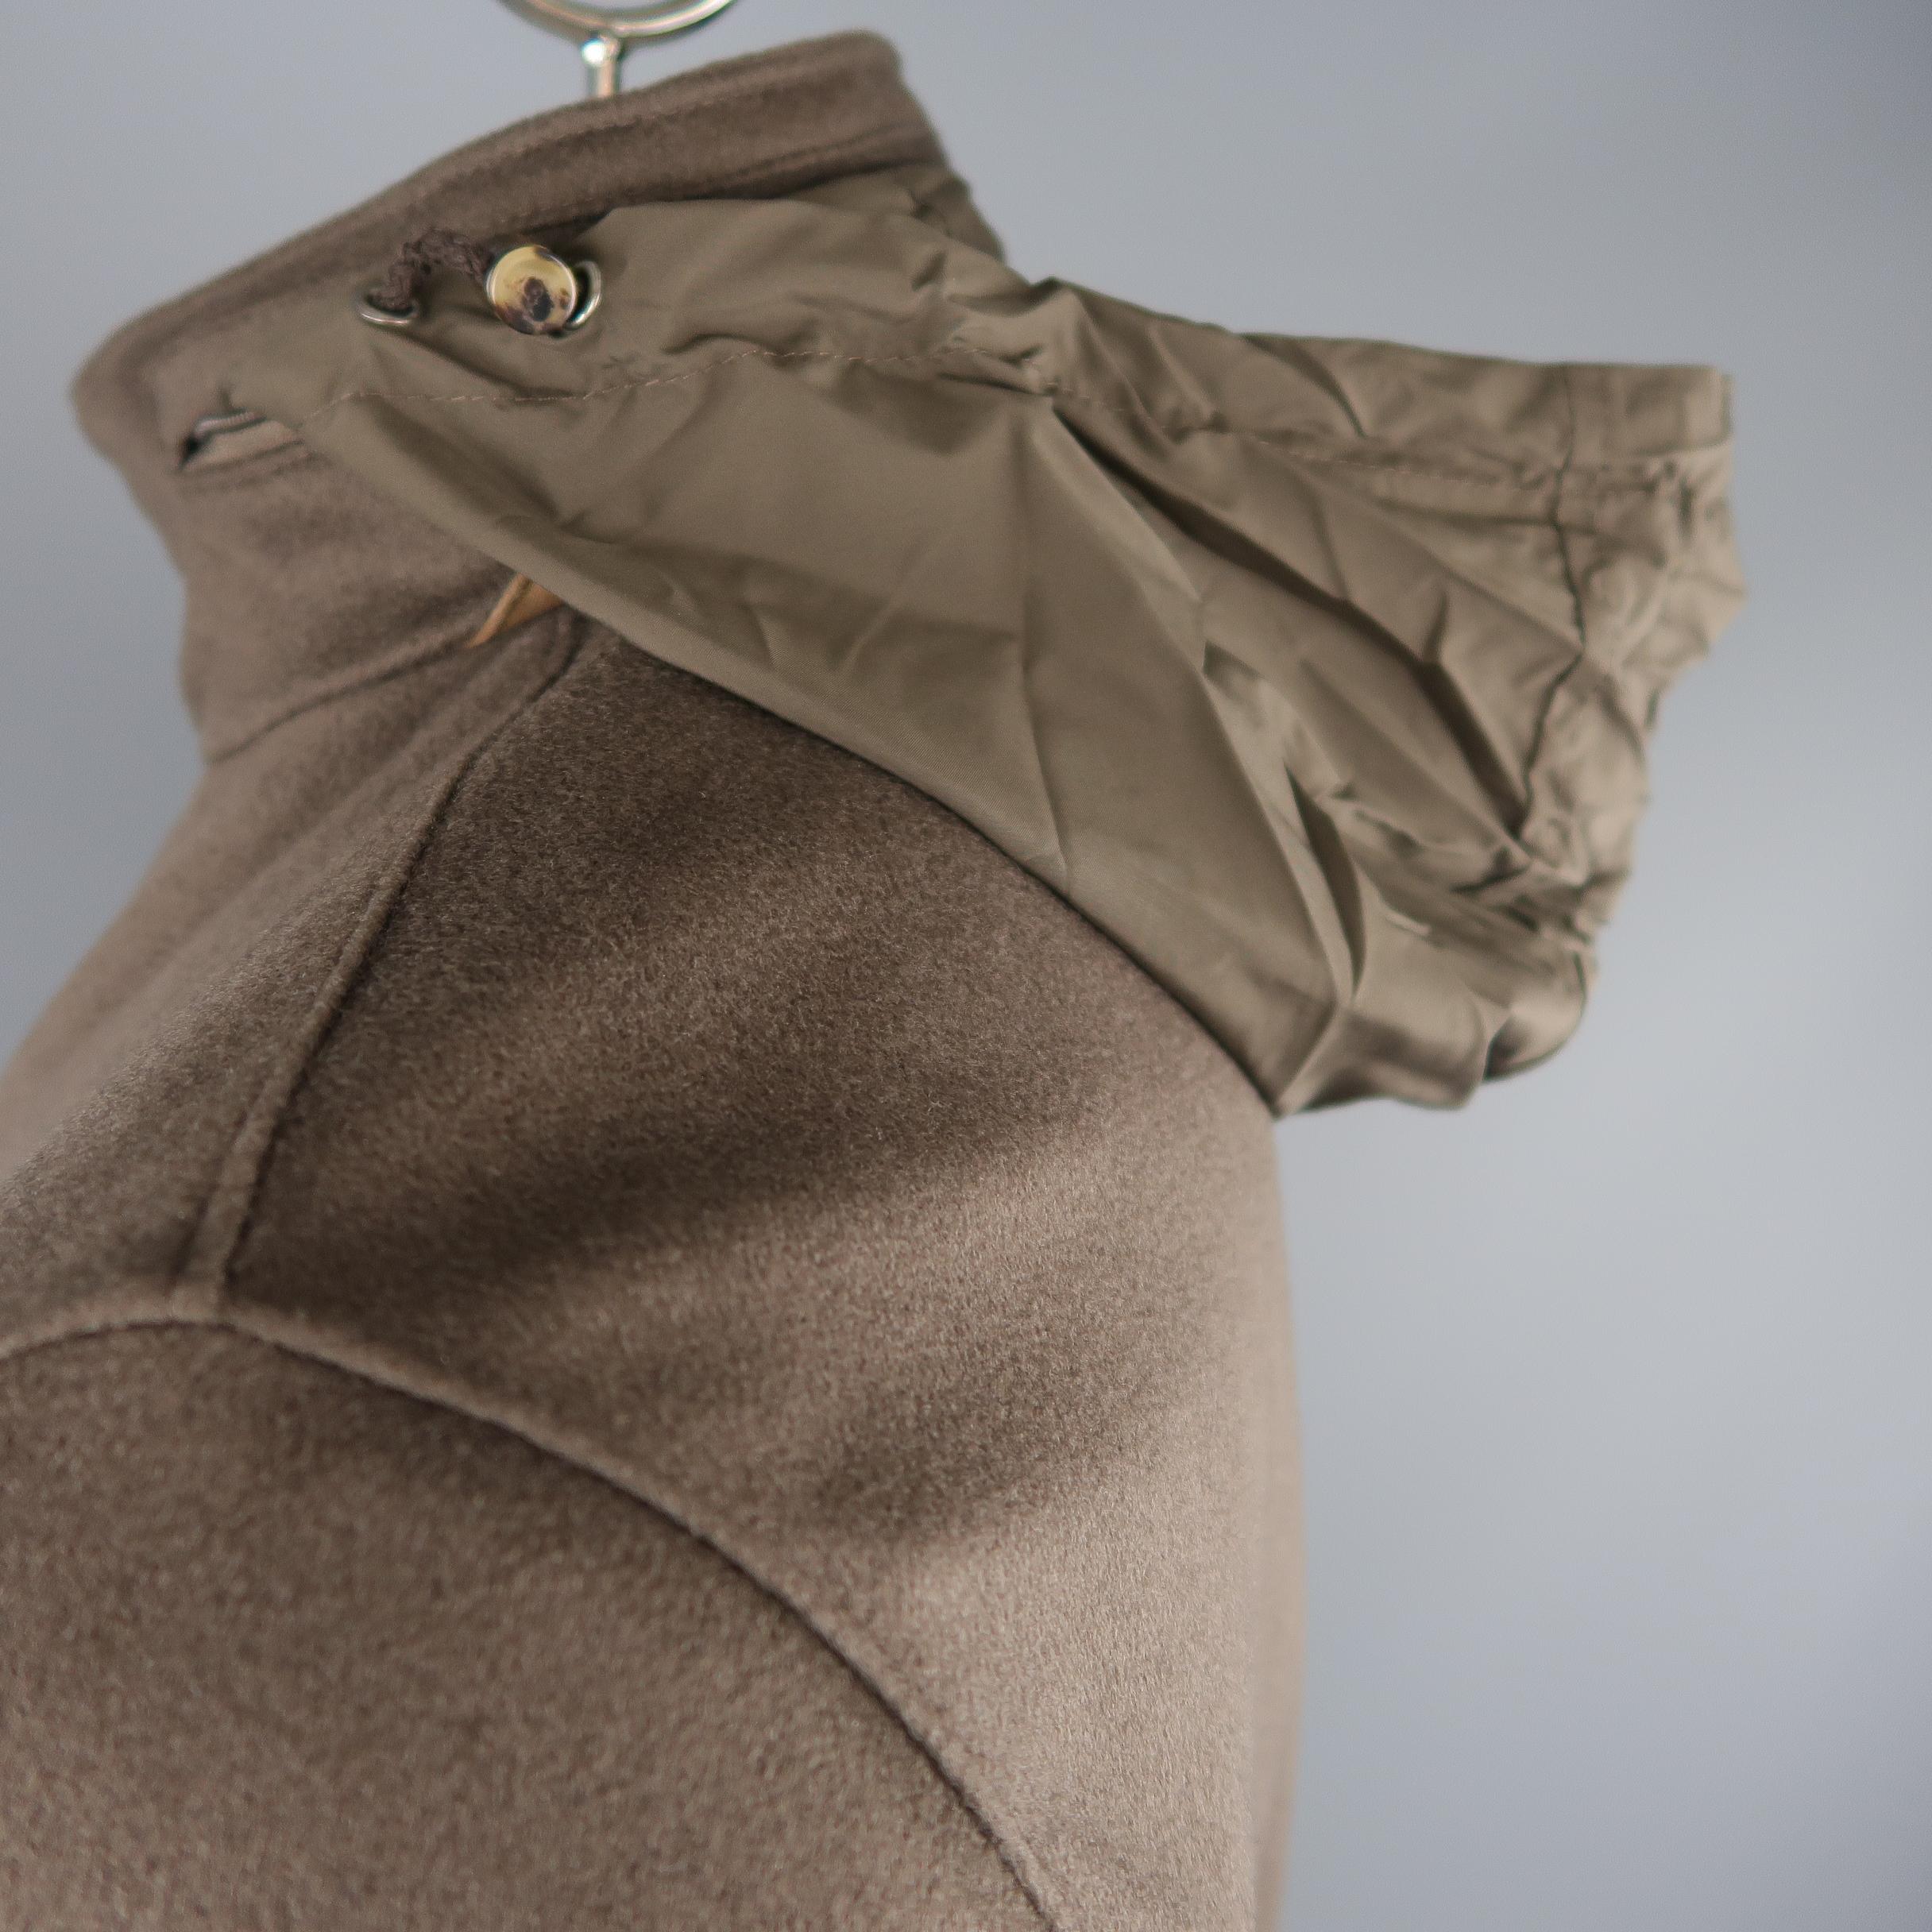 LORO PIANA Storm System jacket comes in brown cashmere with a high, suede trimmed collar with zip out hood, double zip front with hidden snap placket, and flap patch pockets. Made In Italy.
 
New without Tags. Retails: $5,145.00.
Marked: L
